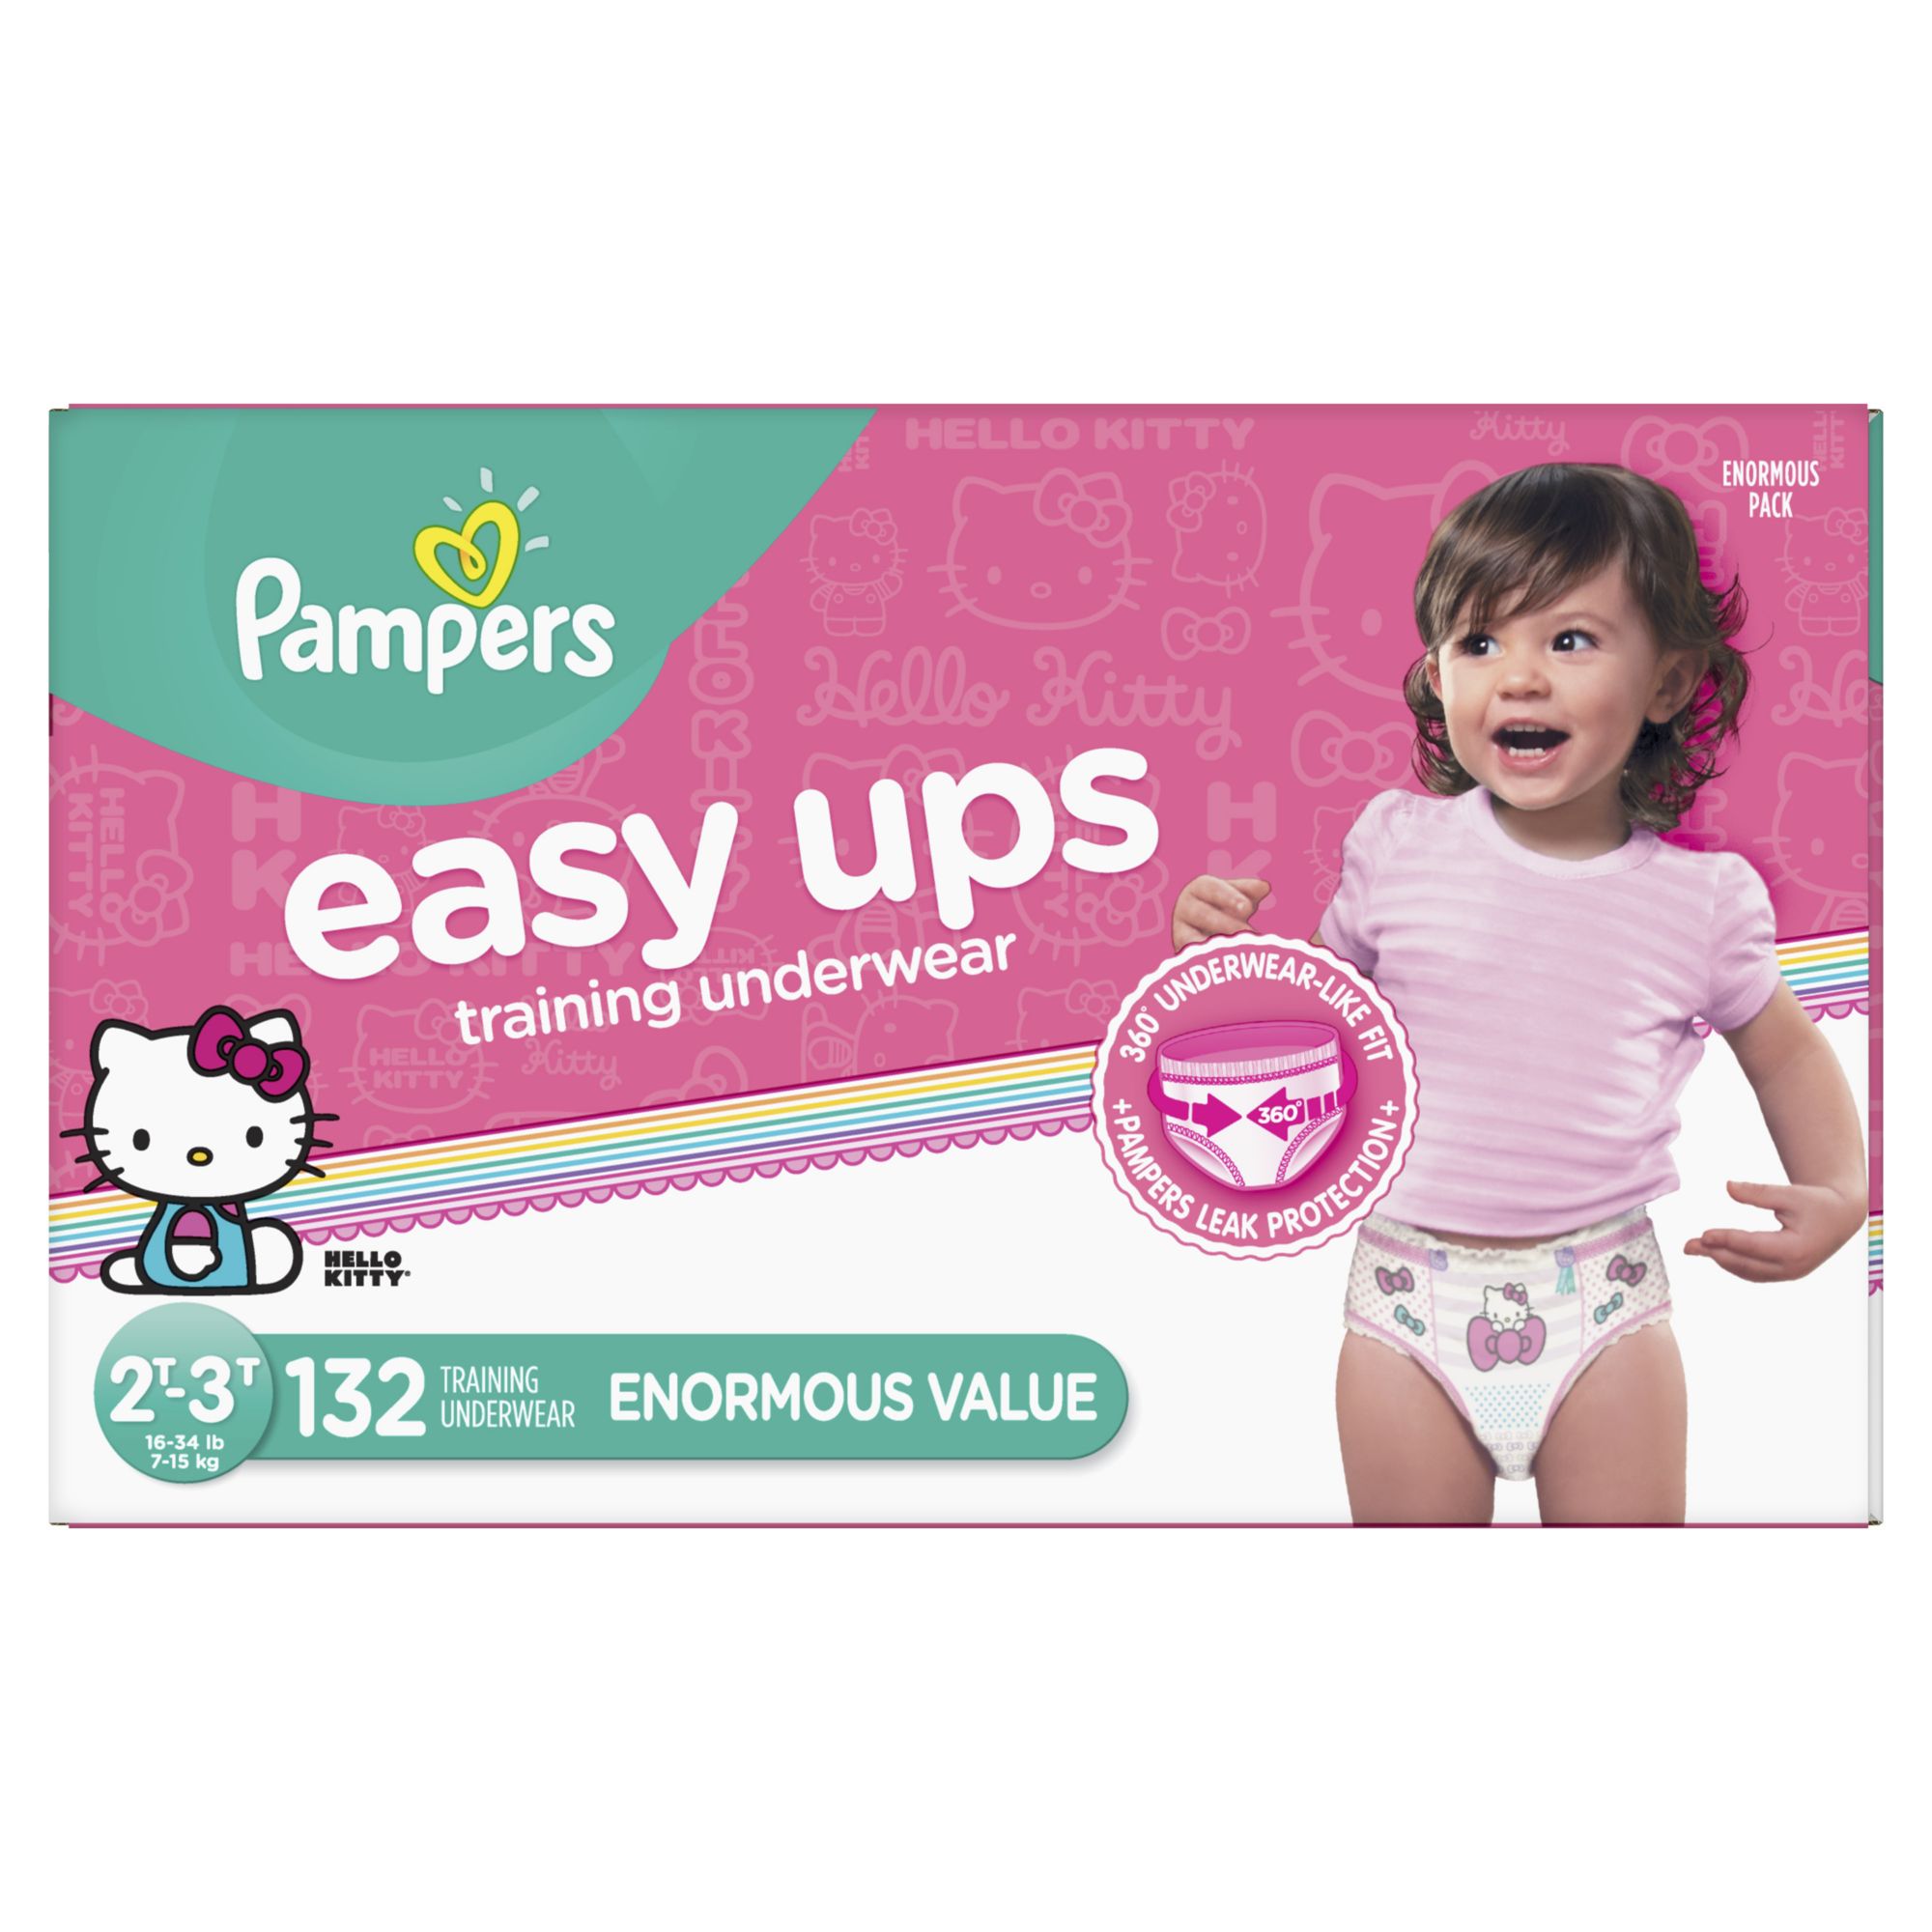 Pampers Easy Ups Training Underwear For Girls, Size 3T-4T, 132 ct